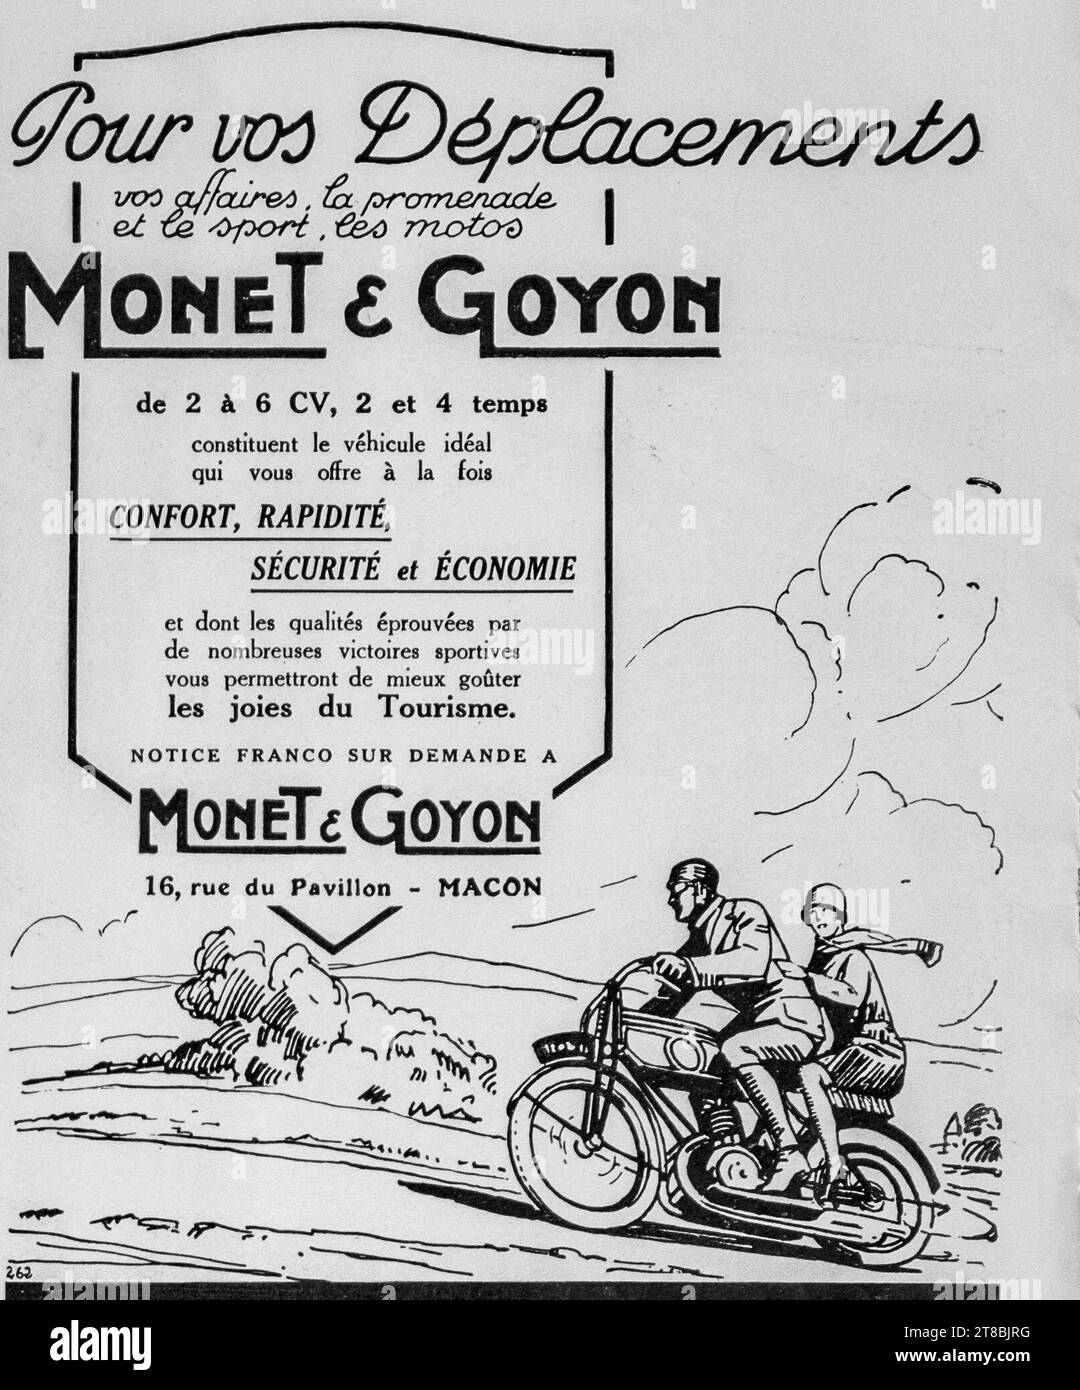 A vintage 1926 French language advertisement for Monet-Goyon motorcycles and portrays a couple riding a Monet-Goyon motorcycle and emphasising its comfort and reliability. Stock Photo